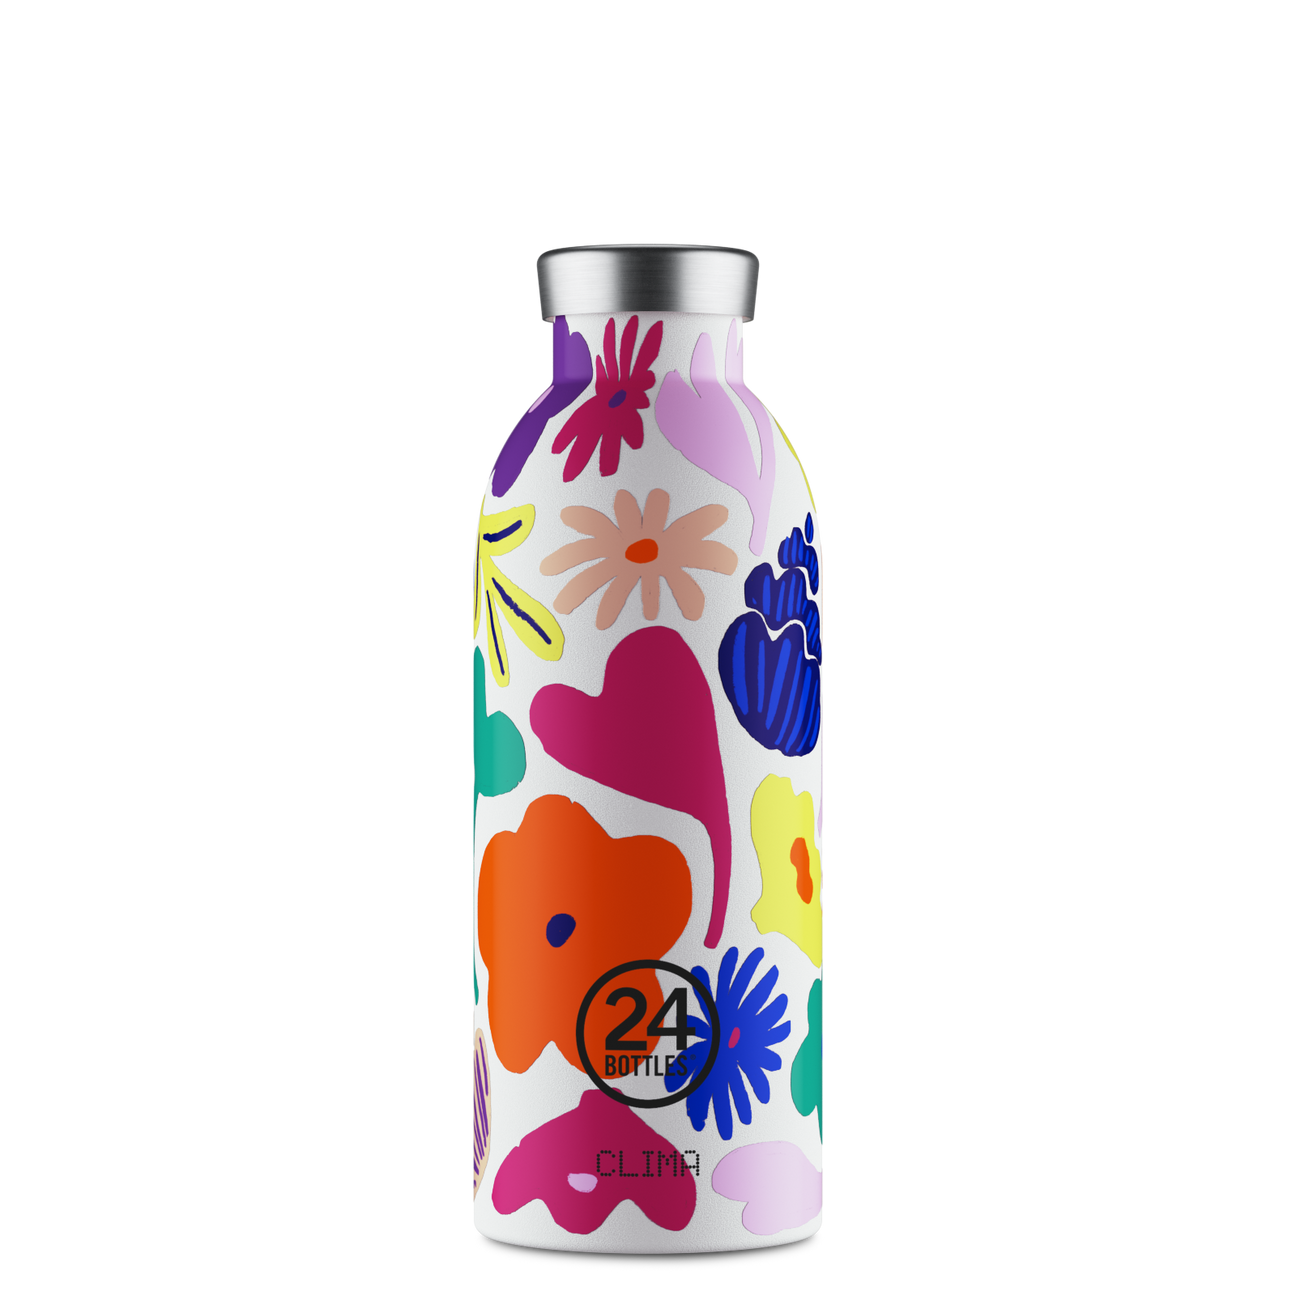 24 Bottles Clima Insulated Bottle 500ml - Camo – Modern Quests